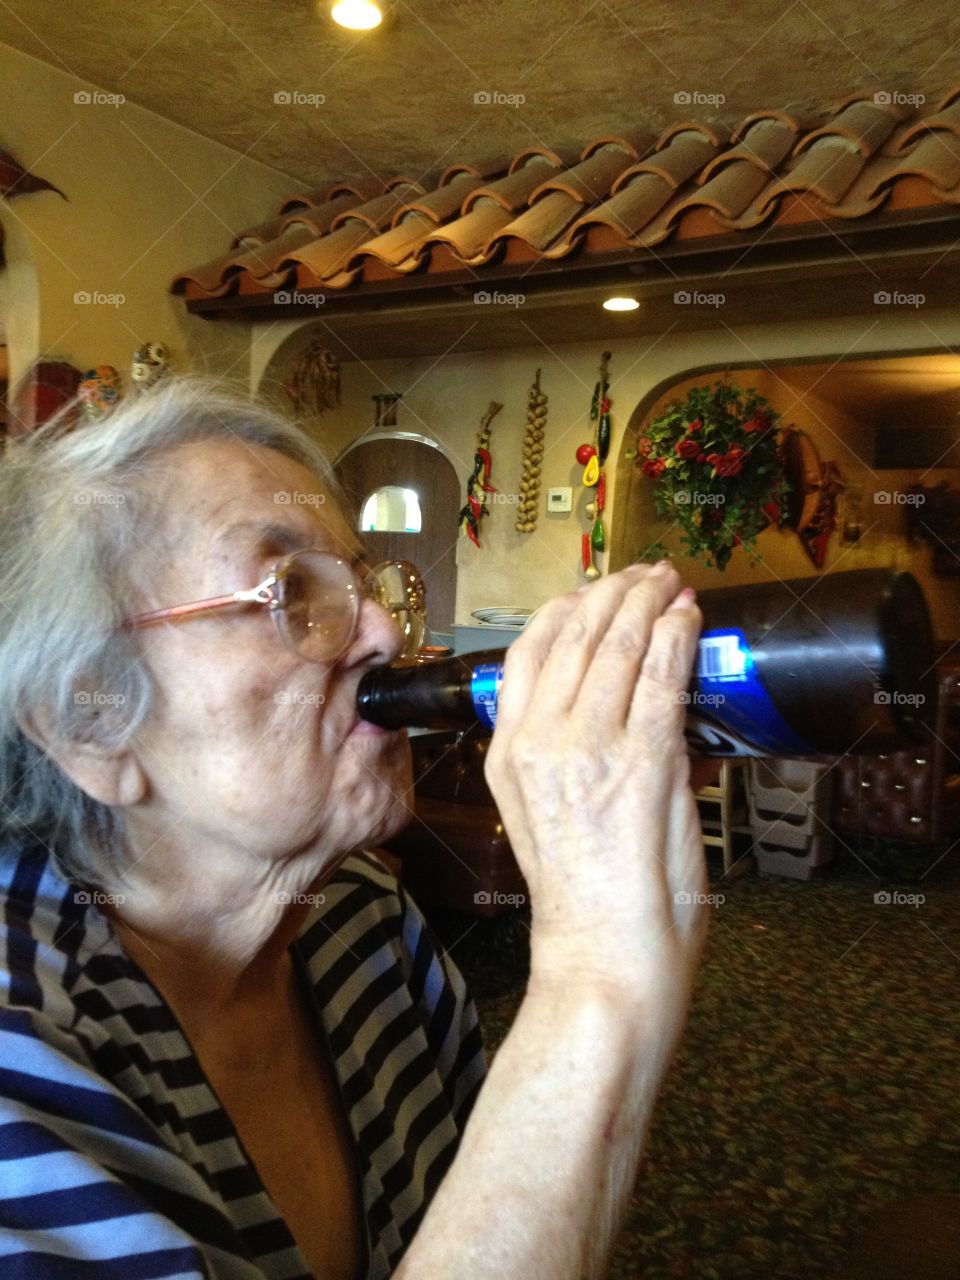 Uh oh- granny's getting drunk! 